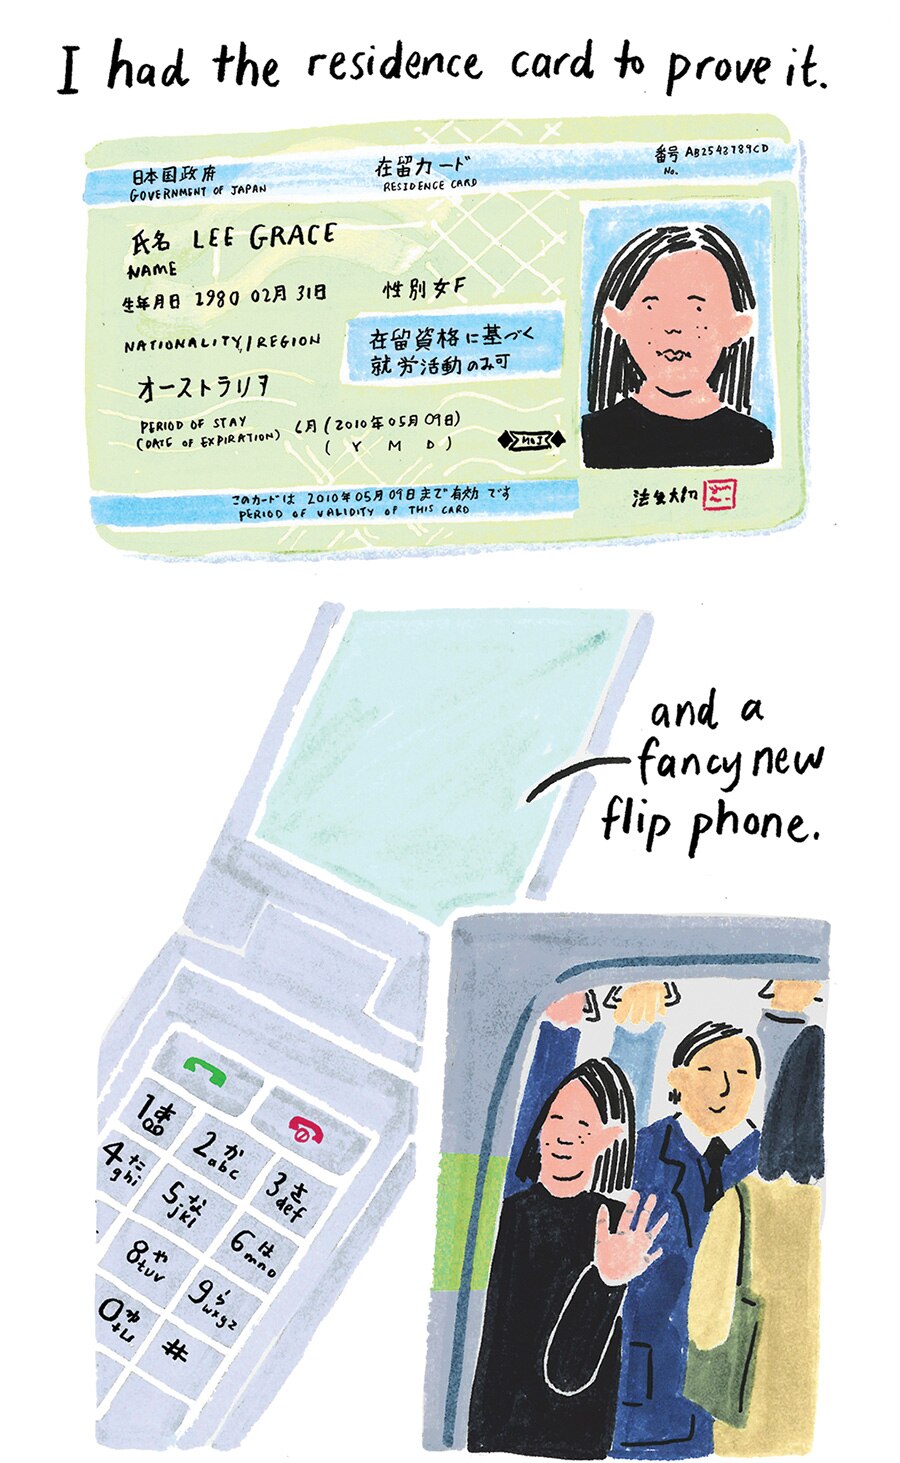 "I had the residence card to prove it [pic of Grace's card] and a fancy new flip phone [pic of phone]."